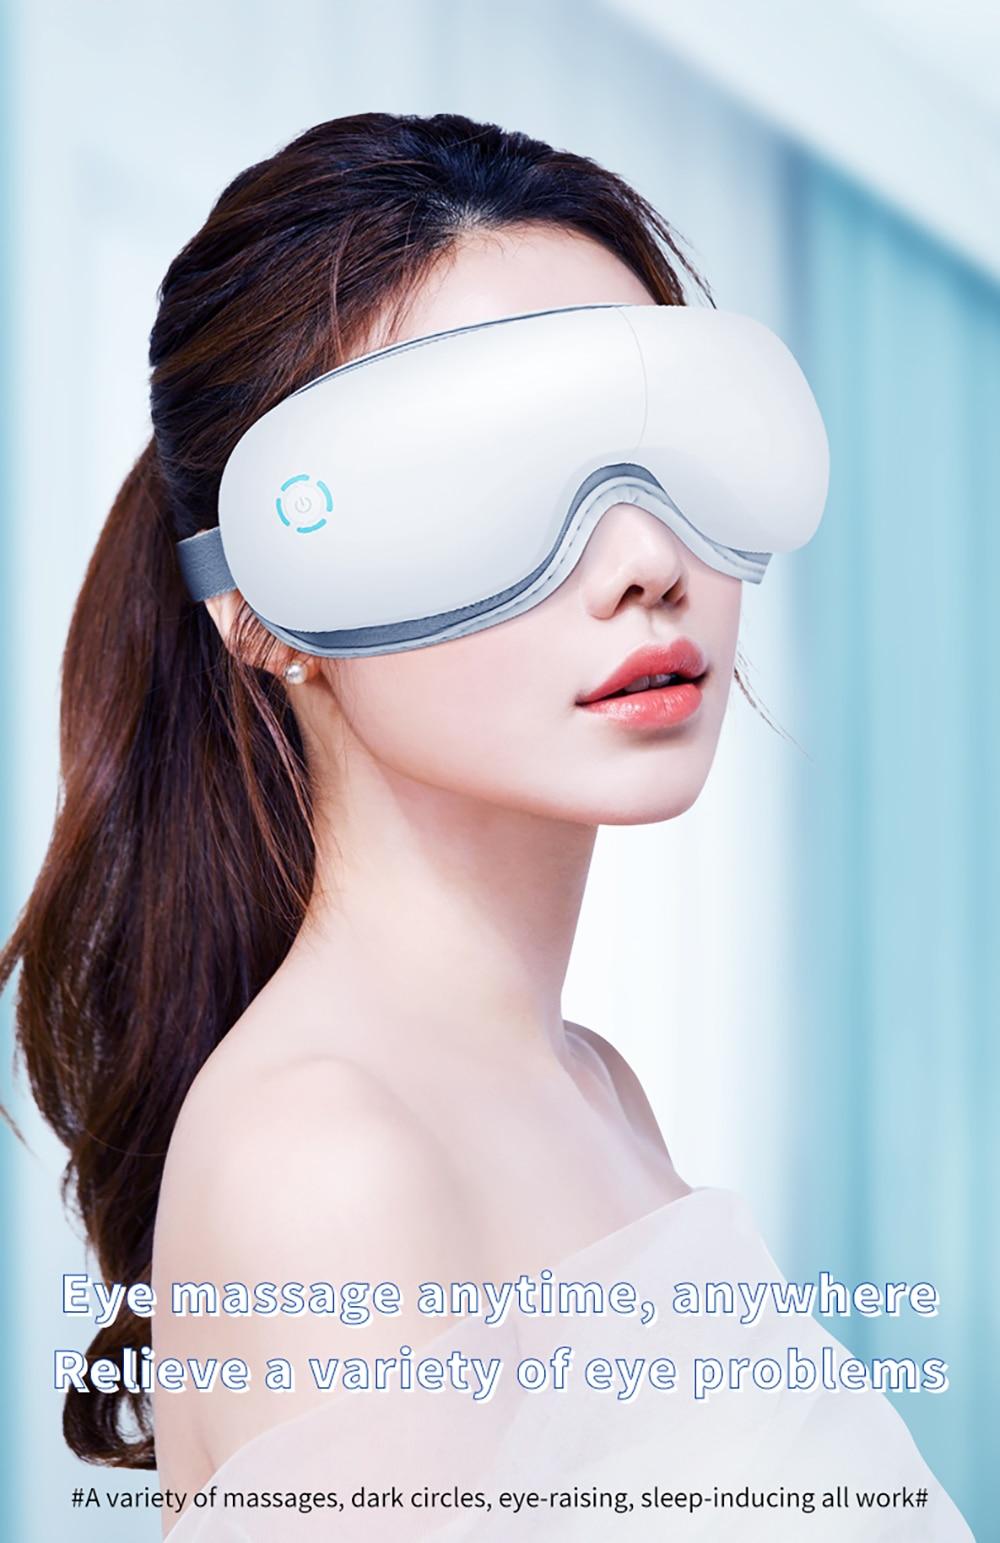 HSKOU Eye Massager 4D Smart Airbag Vibration Eye Health Care Device Heating Bluetooth Music Relieve Fatigue And Dark Circles